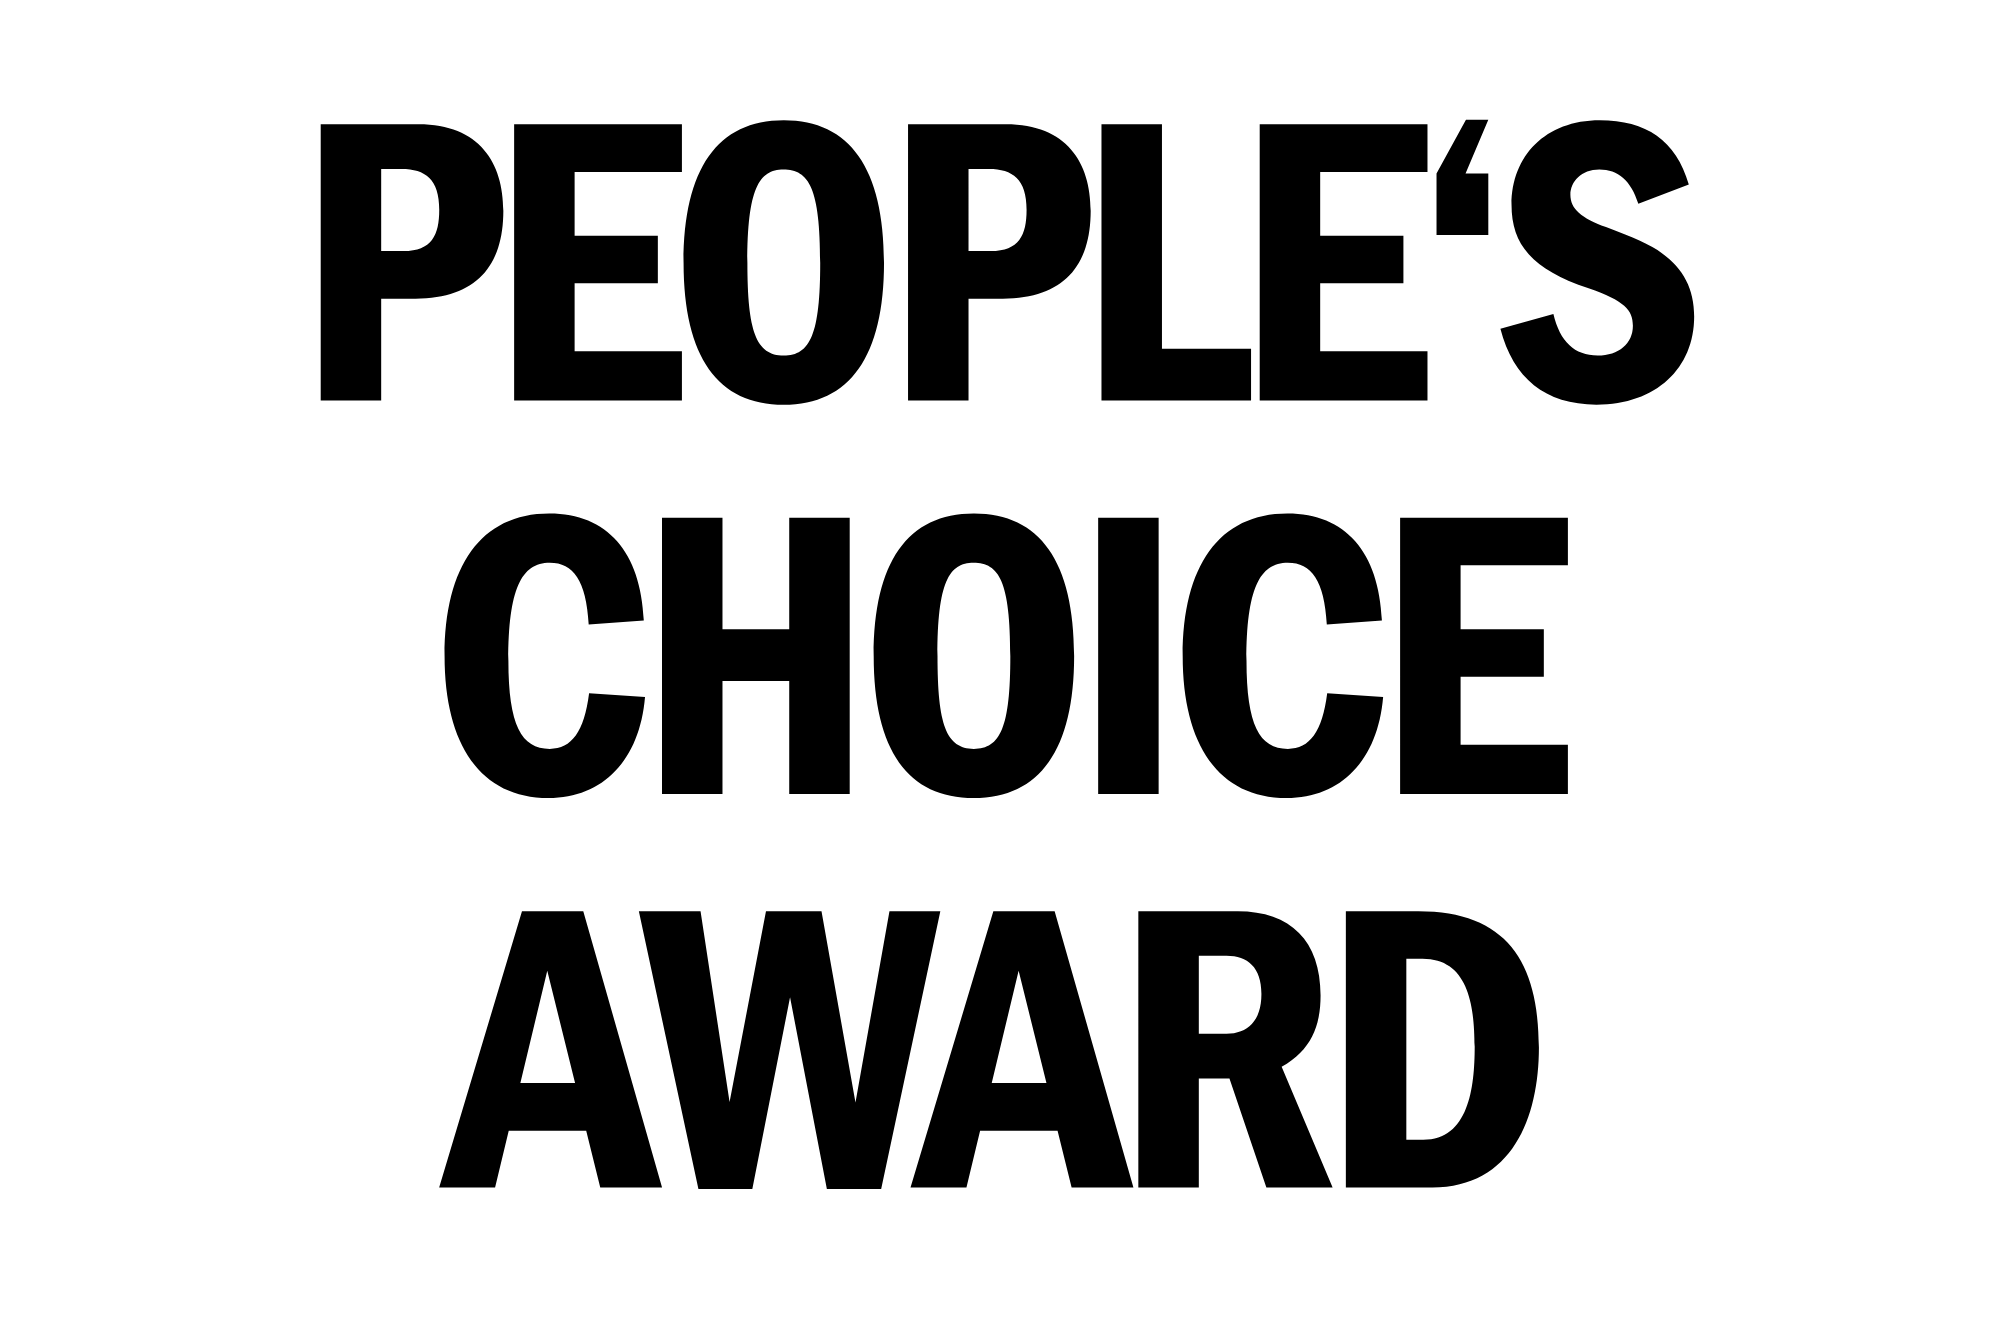 Bol black text on a white background reads, "People's Choice Award."